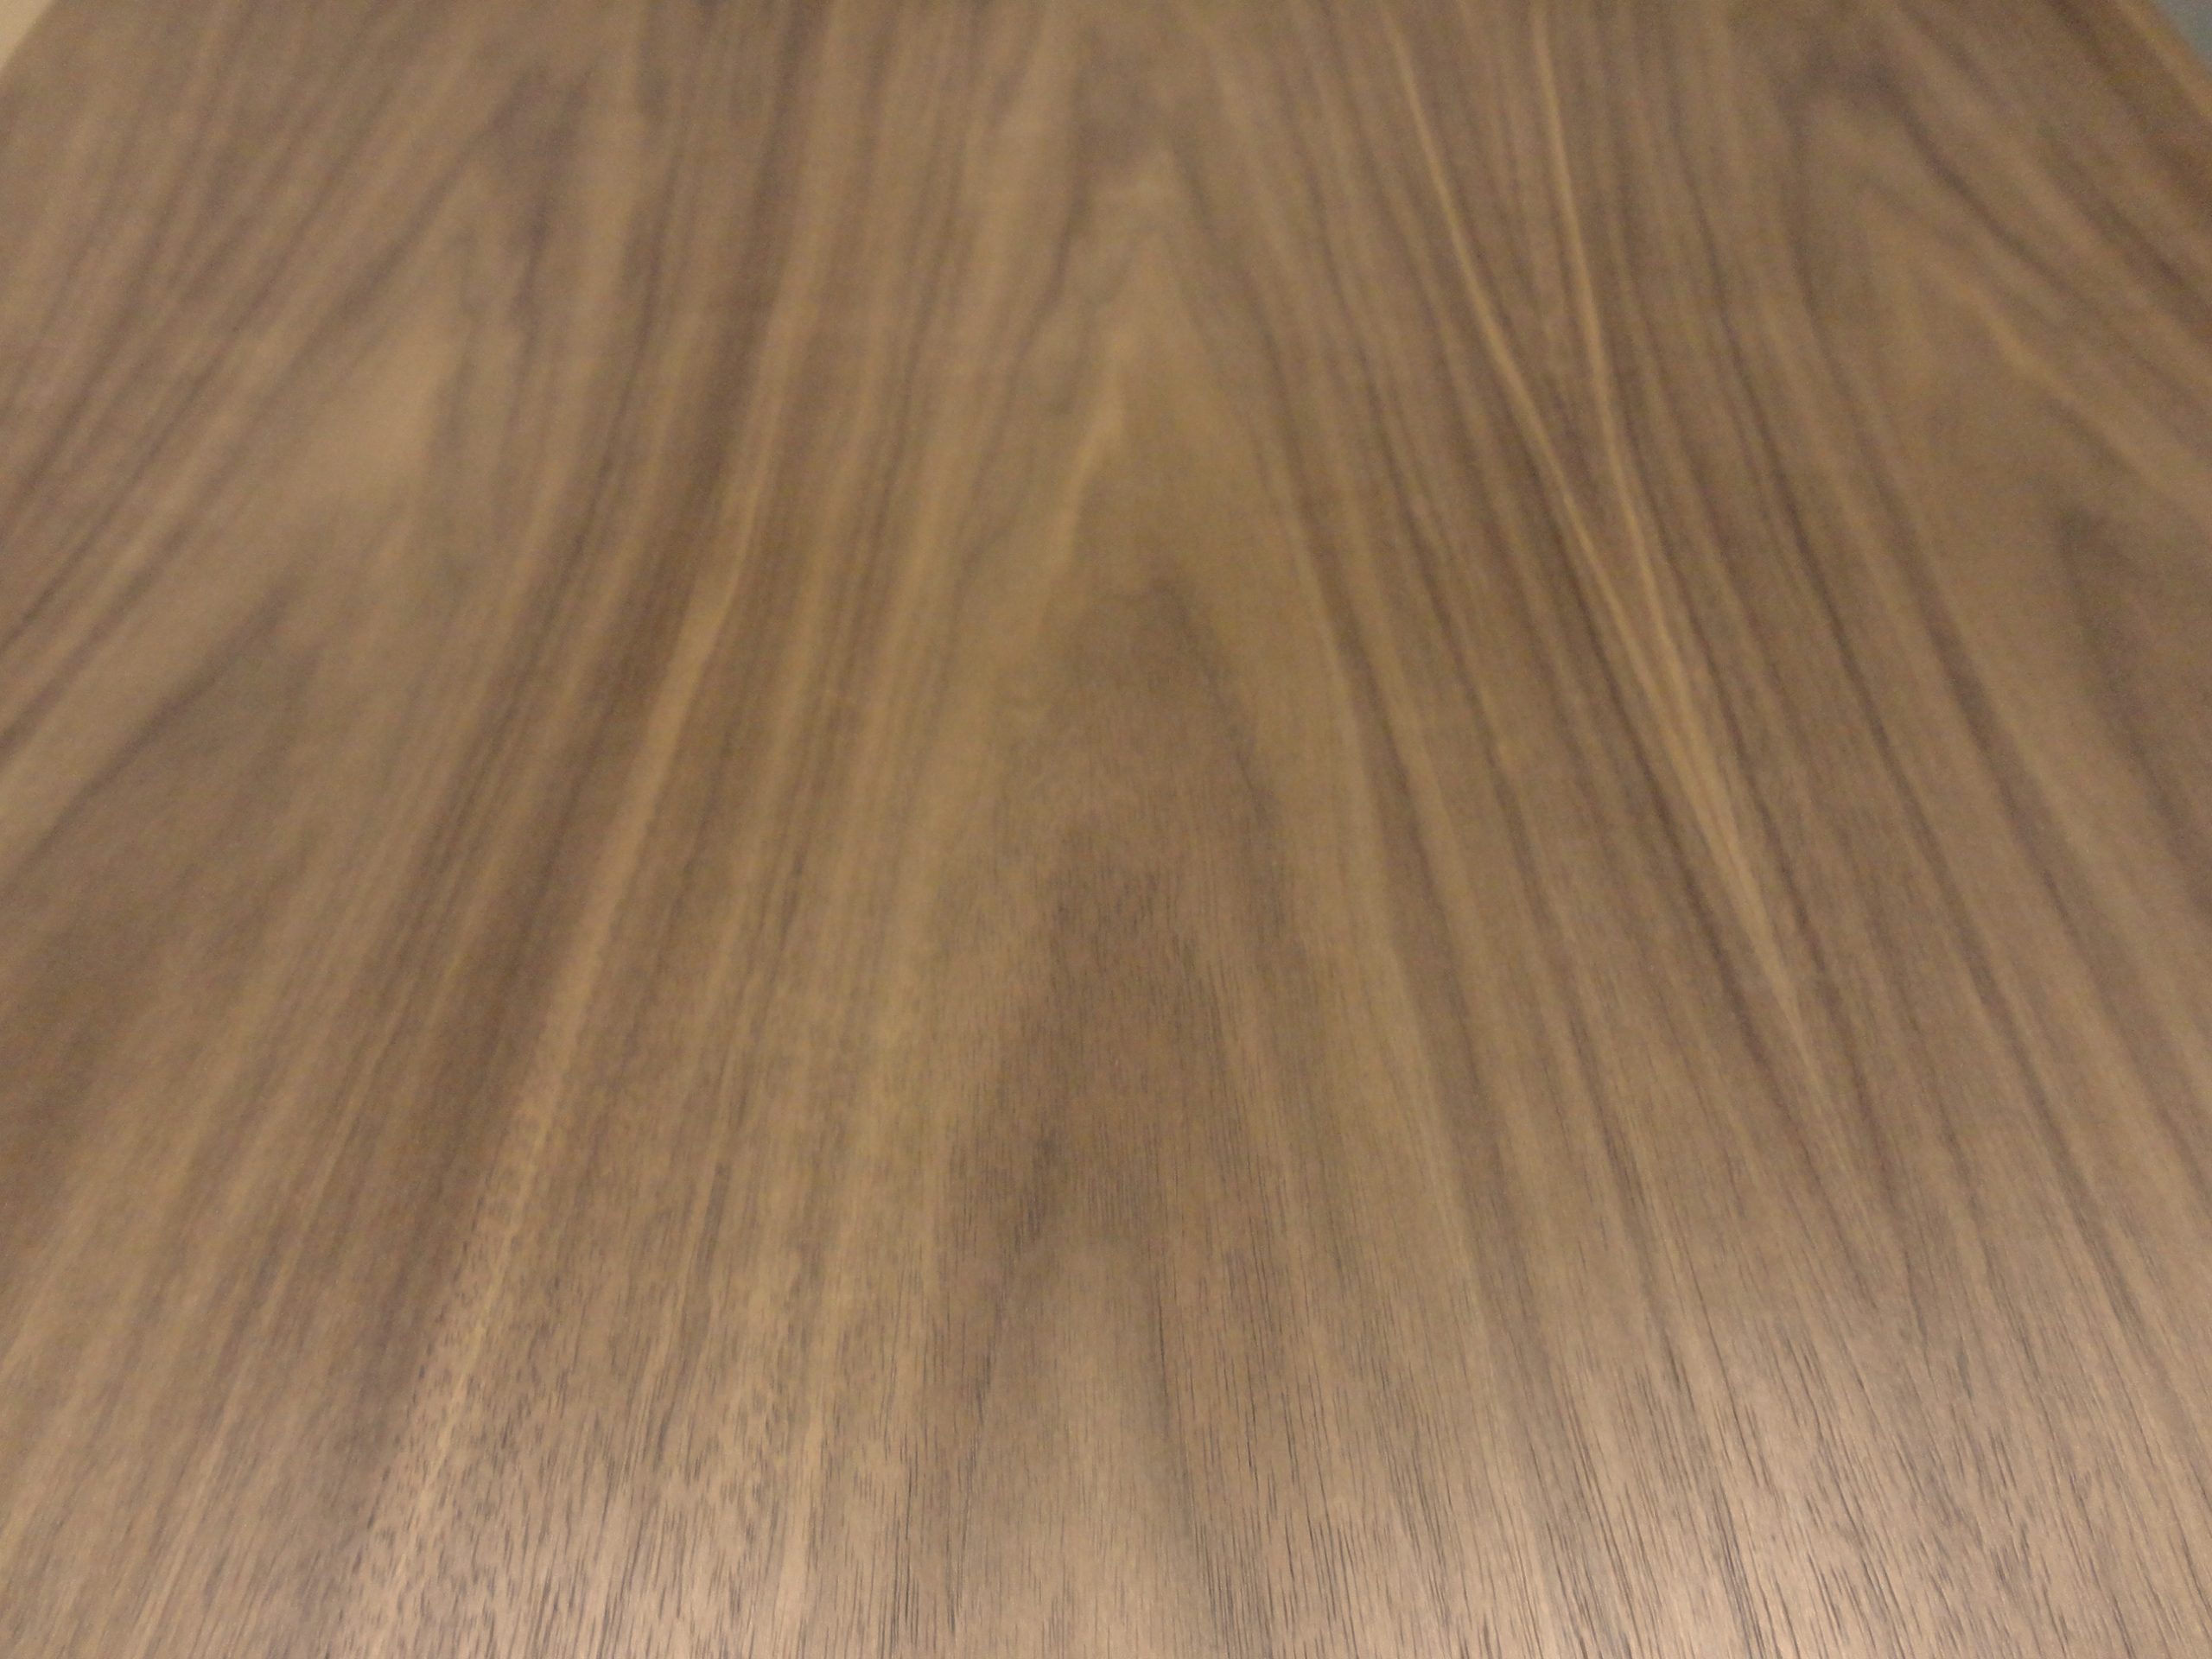 12 Square Feet, Walnut Veneer, 4.5 To 6.5 Wide X 48 Long, Sequence  Matched Sheets